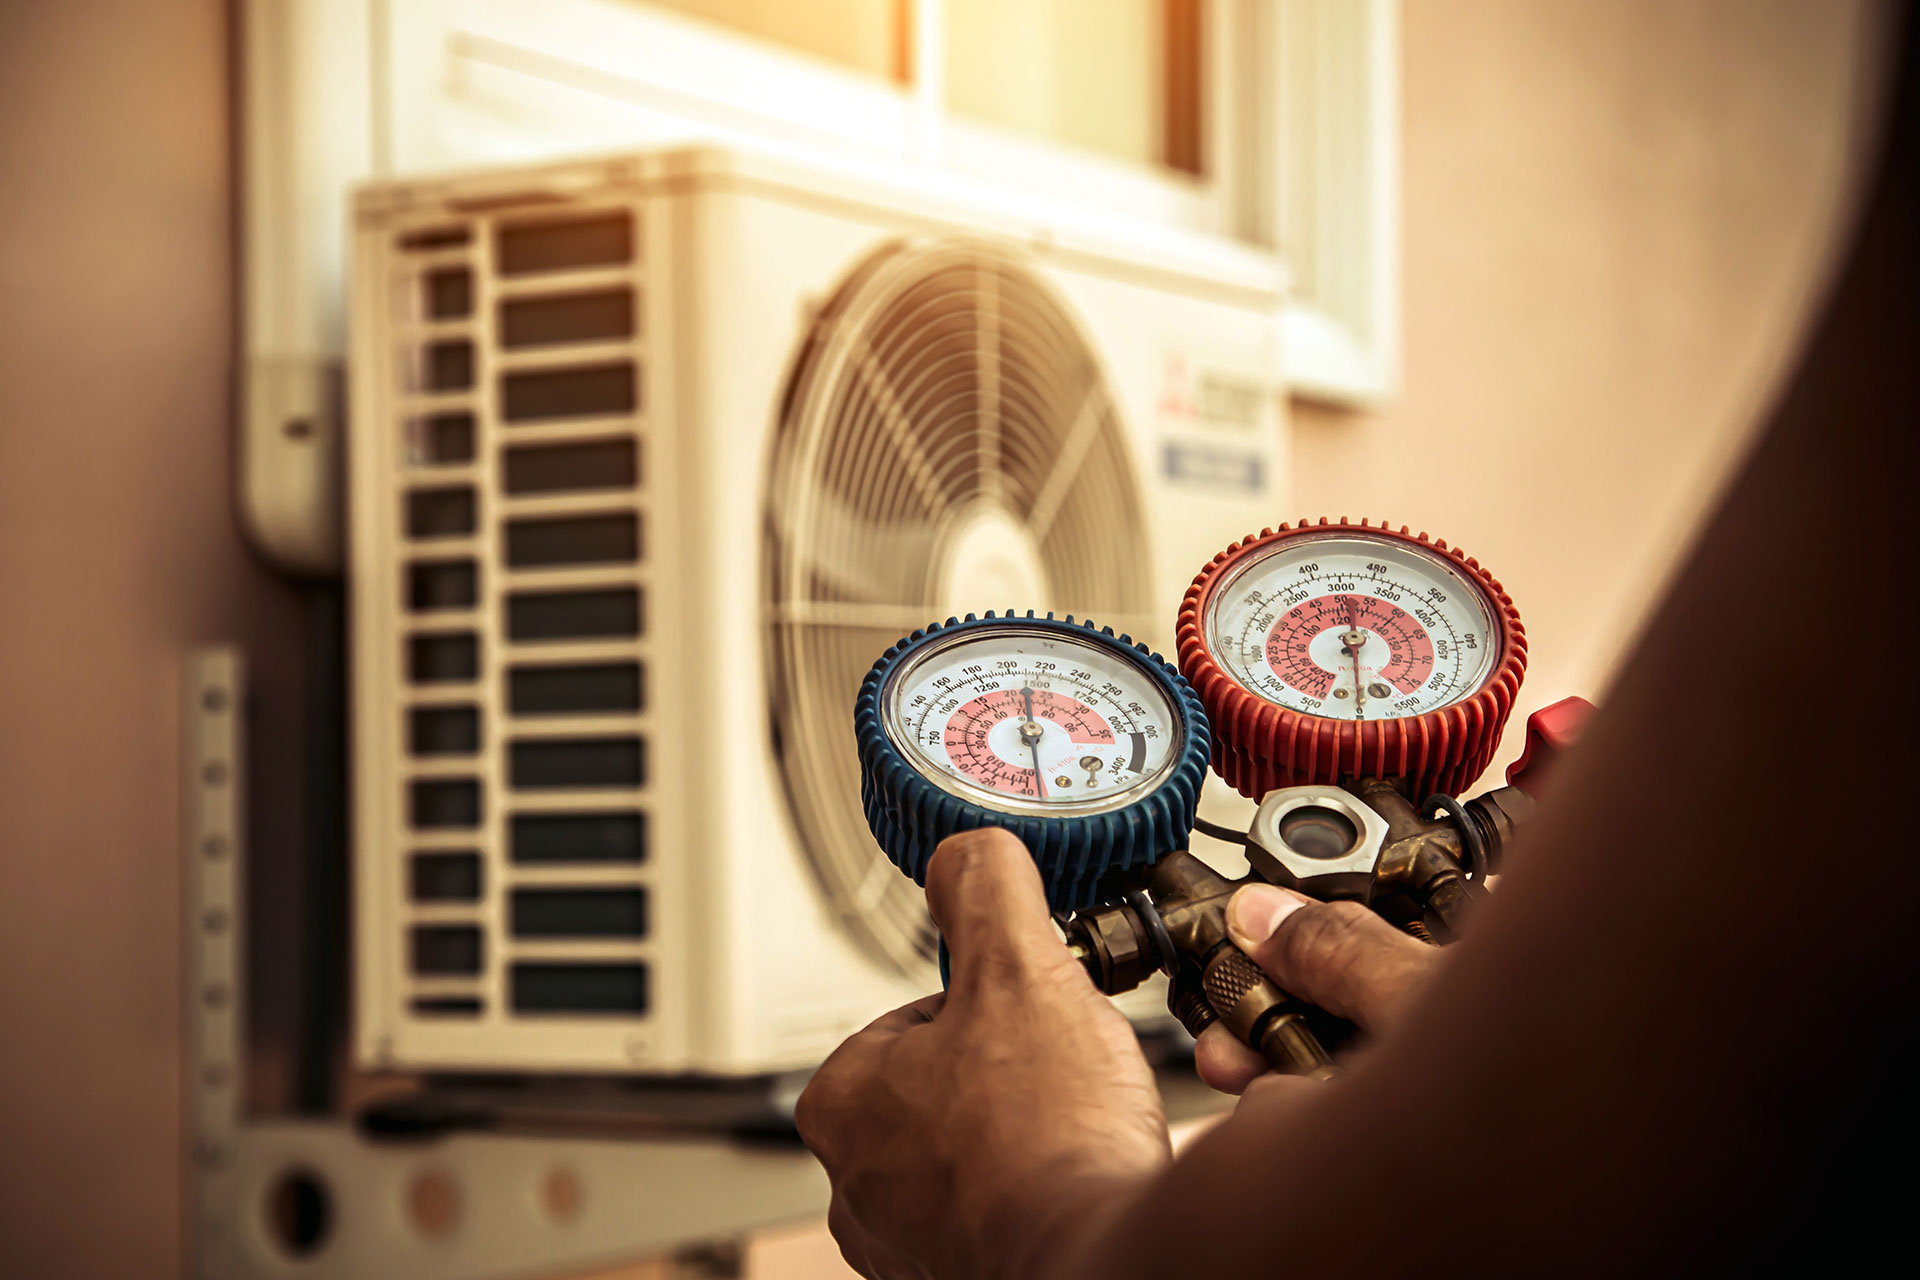 Pace Heating & Cooling - HVAC Service You Can Trust!